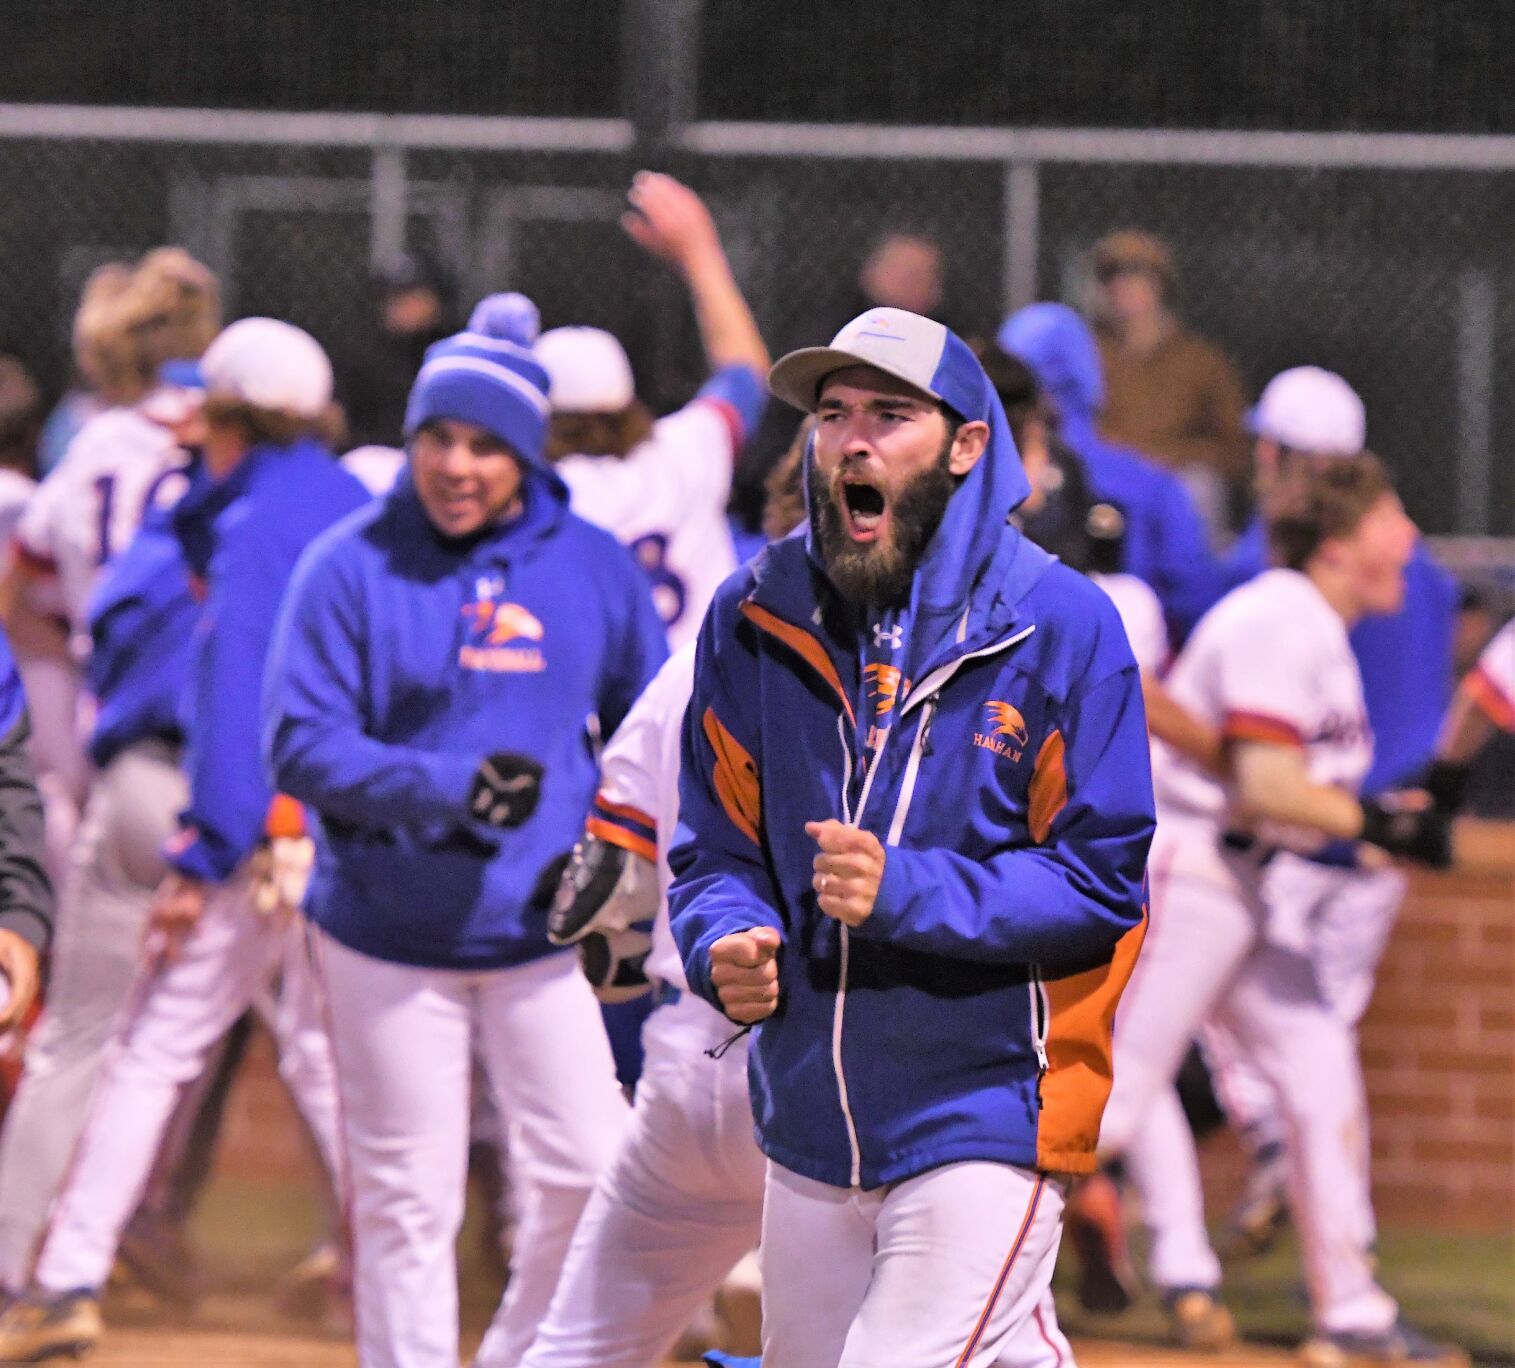 57 teams to Compete in the 54th Annual Hanahan Invitational Baseball Tournament